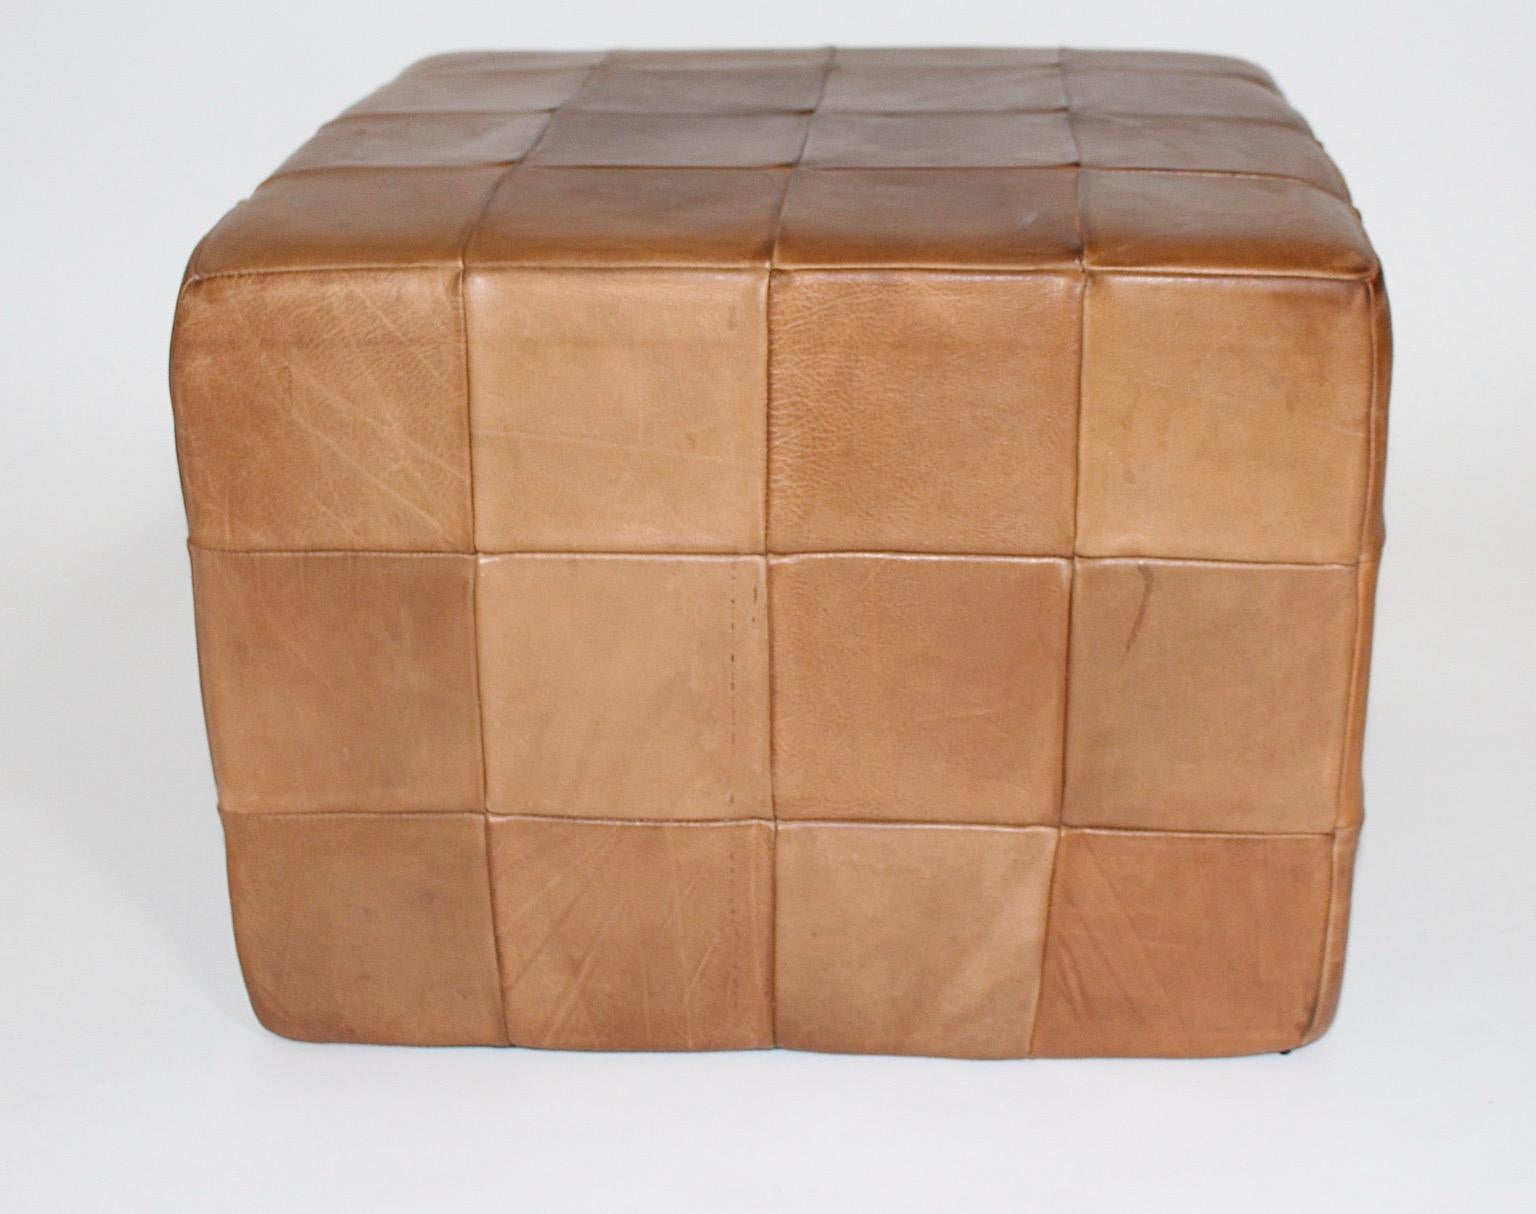 Modernist Organic Vintage Brown Patchwork Leather Cubus Stool DeSede 1970s For Sale 9